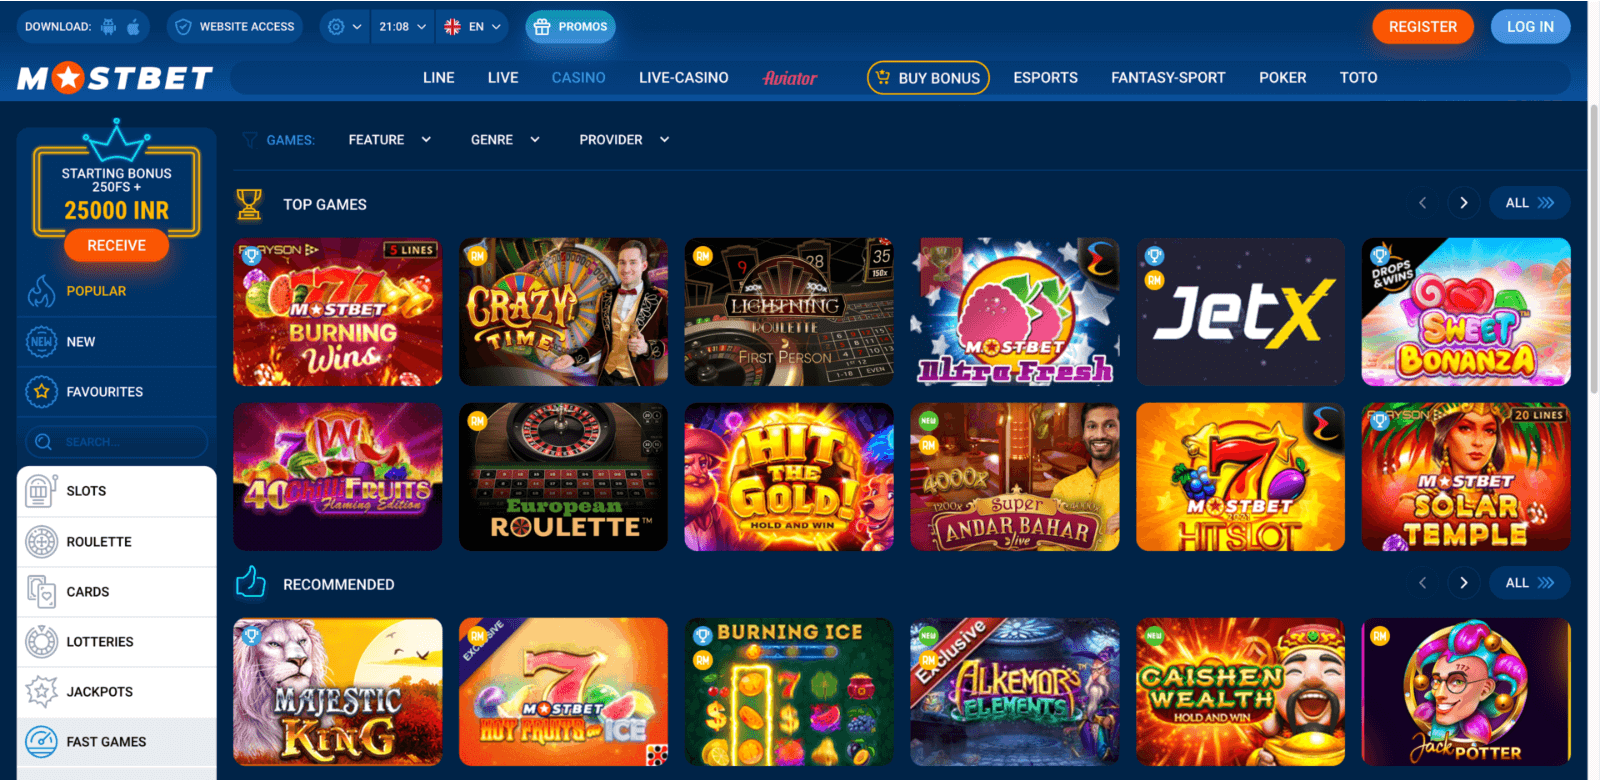 the mostbet casino section offers hundreds of exciting games